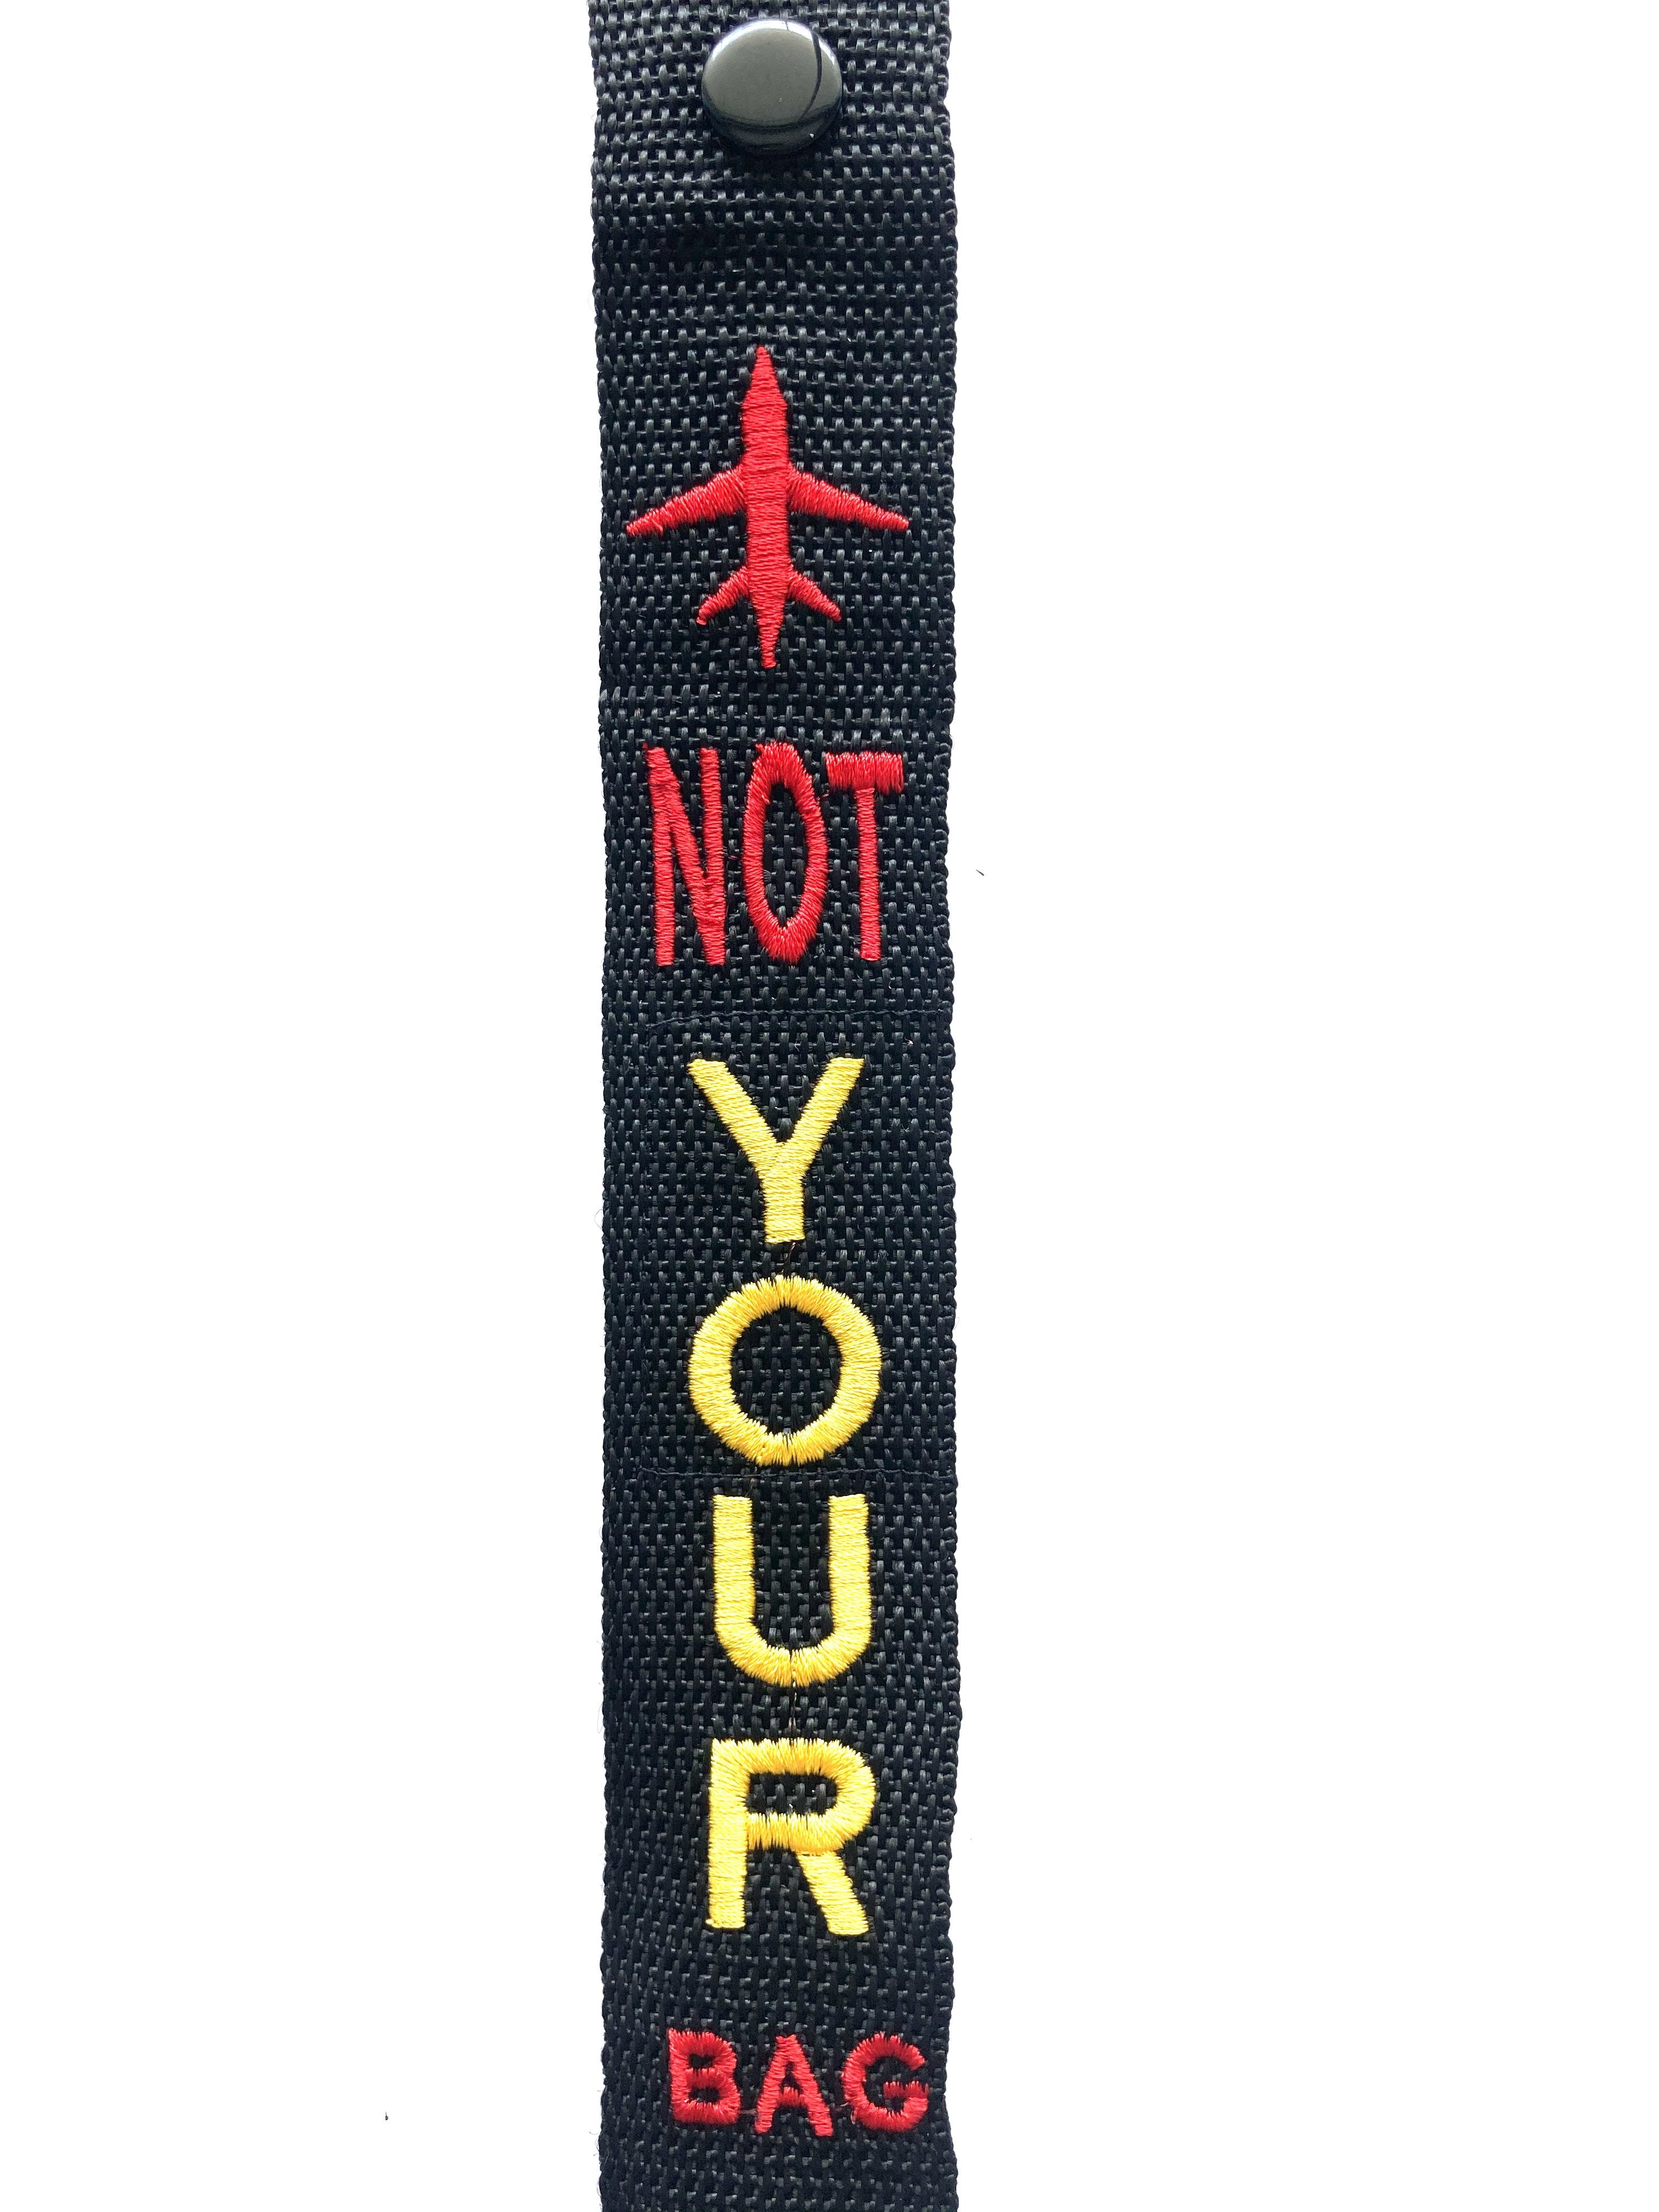 Not your bag Luggage Tag